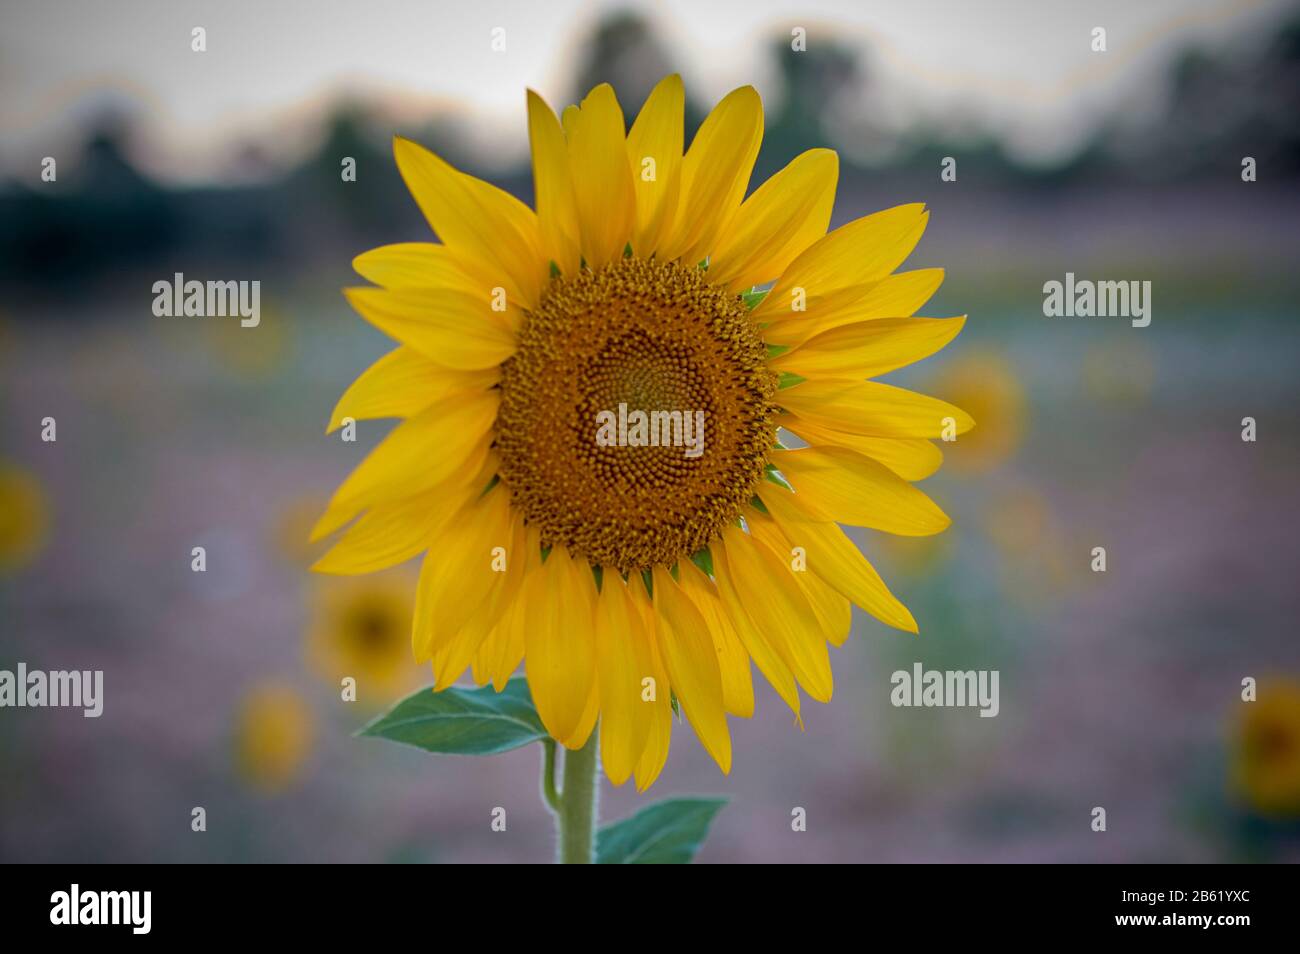 detail of an isolated yellow sunflower open in a sunset on an unfocused background Stock Photo